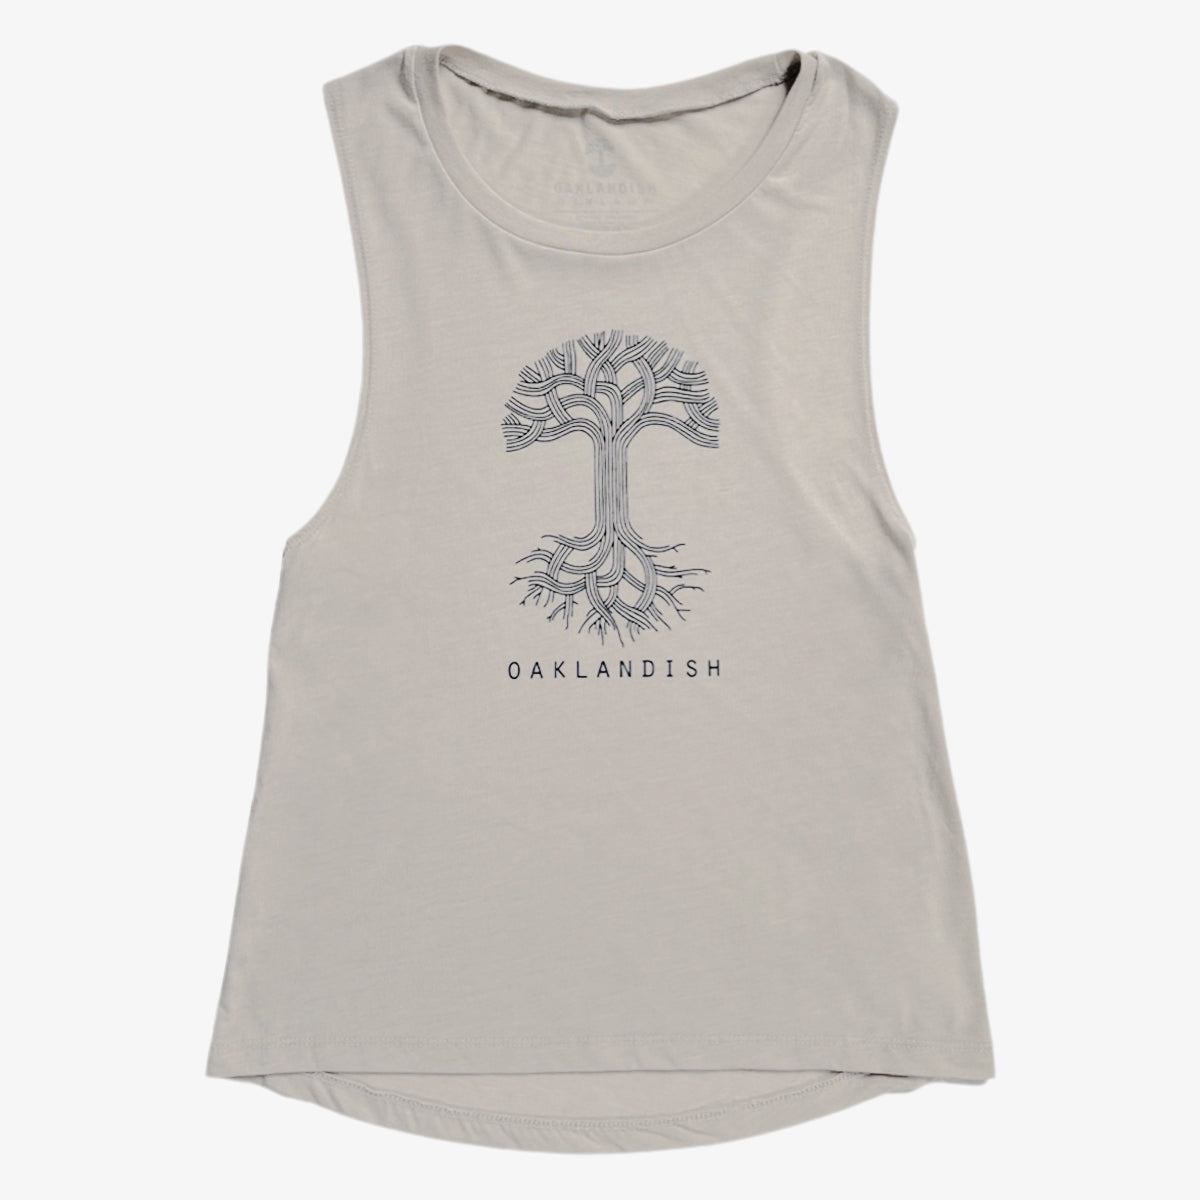 Heather dust women’s cut tank top with black classic Oaklandish tree logo and wordmark on chest.